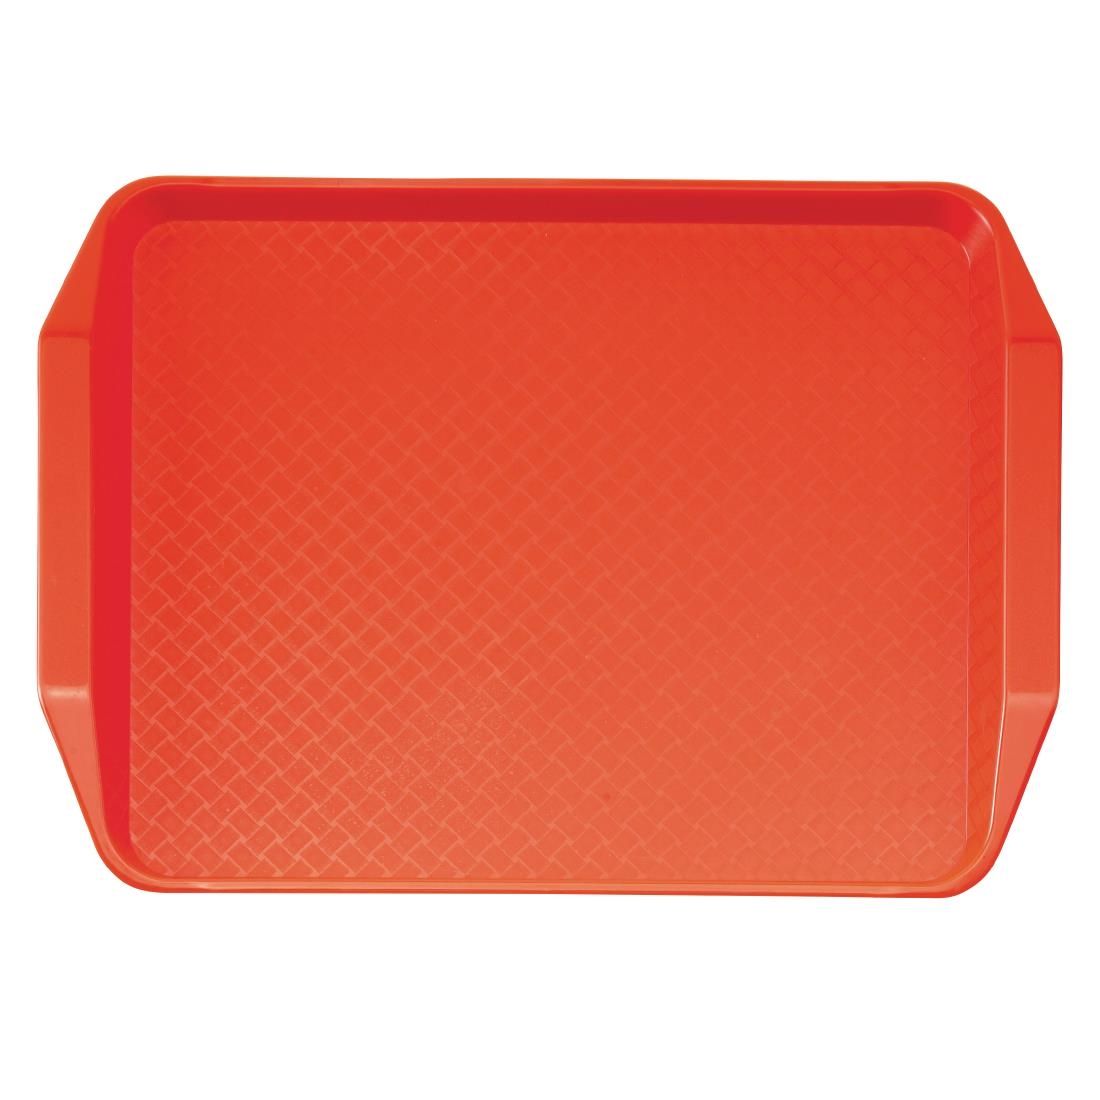 DE315 Cambro Polypropylene Handled Fast Food Tray Red 430mm JD Catering Equipment Solutions Ltd